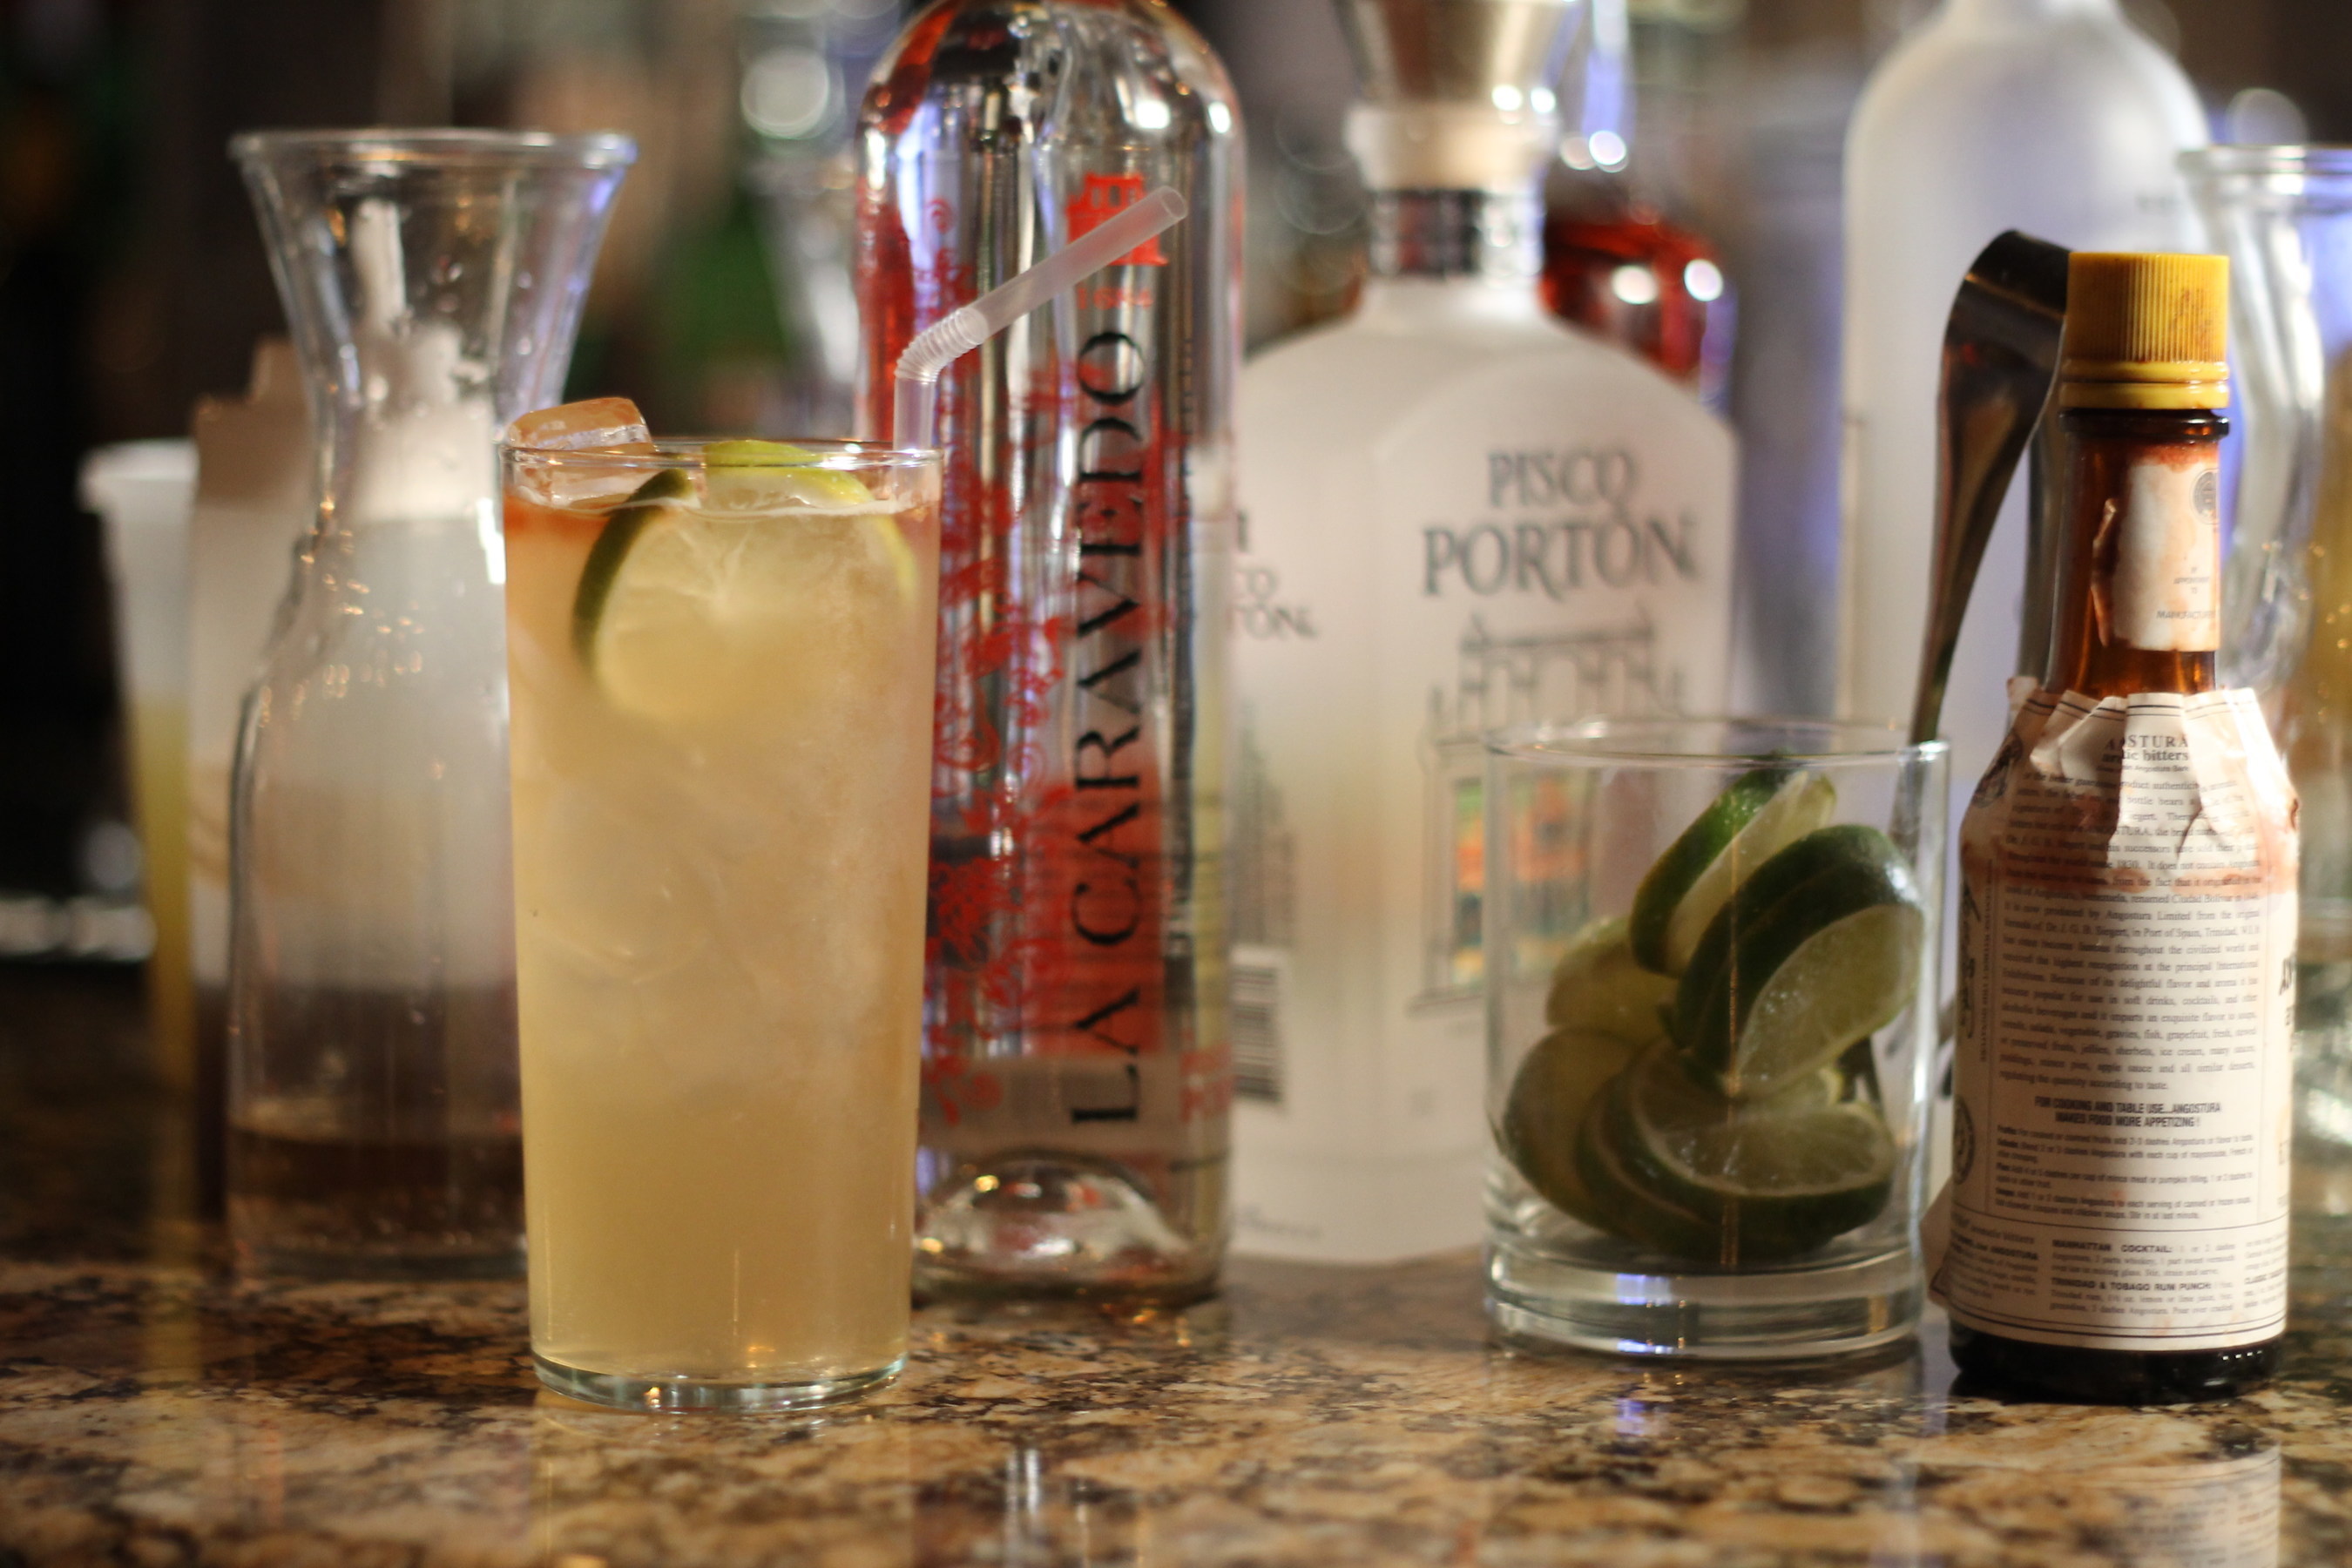 Spice up your summer cocktails with Pisco drinks with ingredients from Peru the Aji Amarillo or fresh Mango juice.